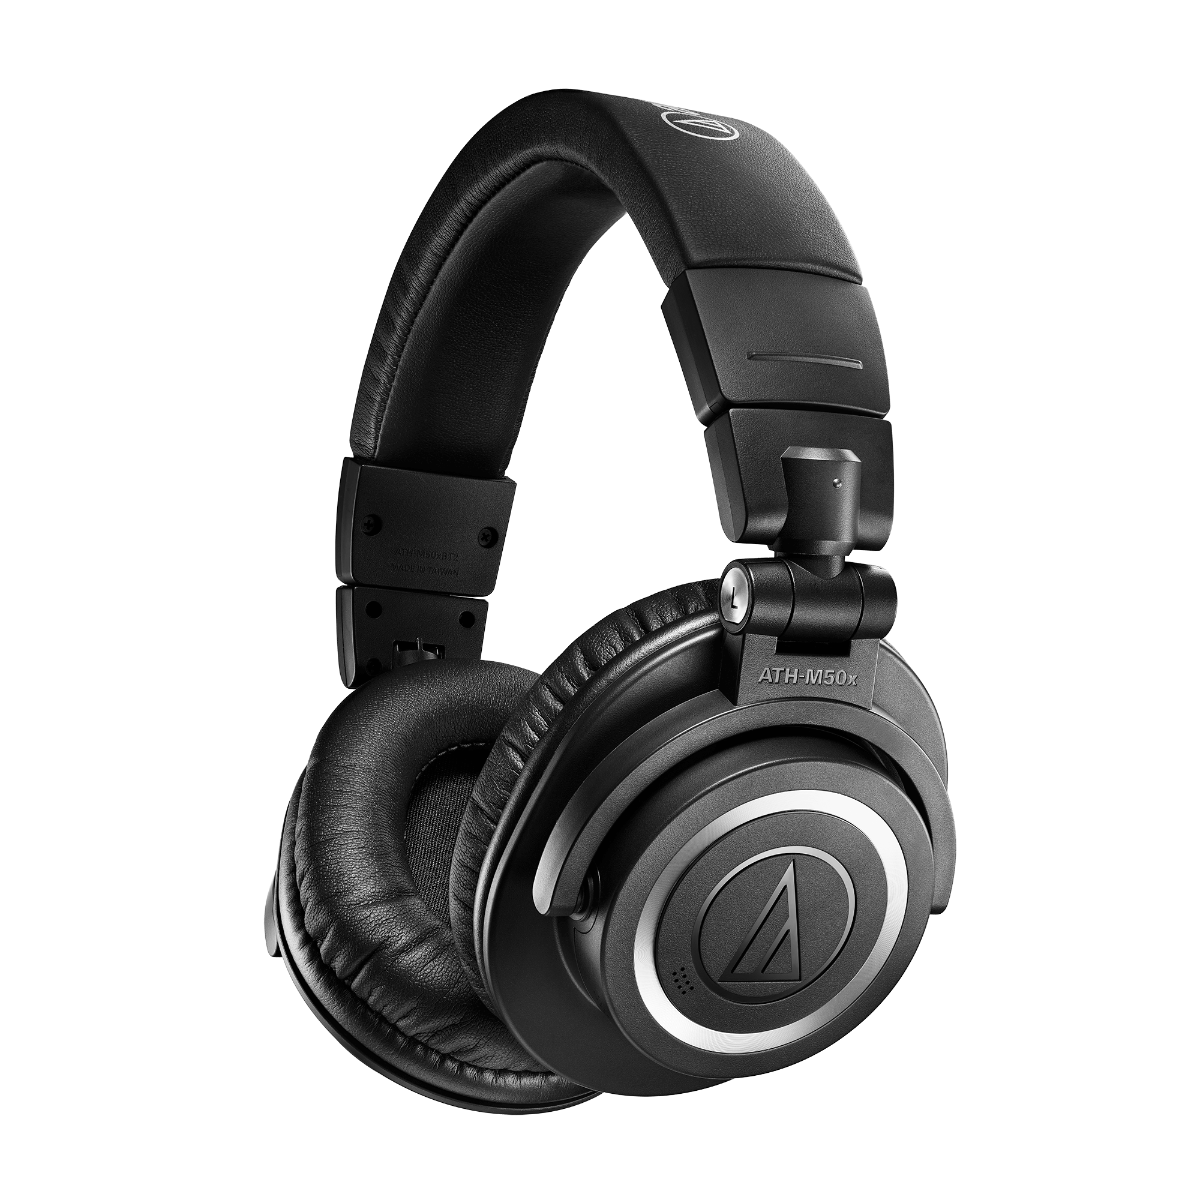 Audio-Technica white background product image of the ATH-M50xBT2 Wireless Over-Ear Headphones